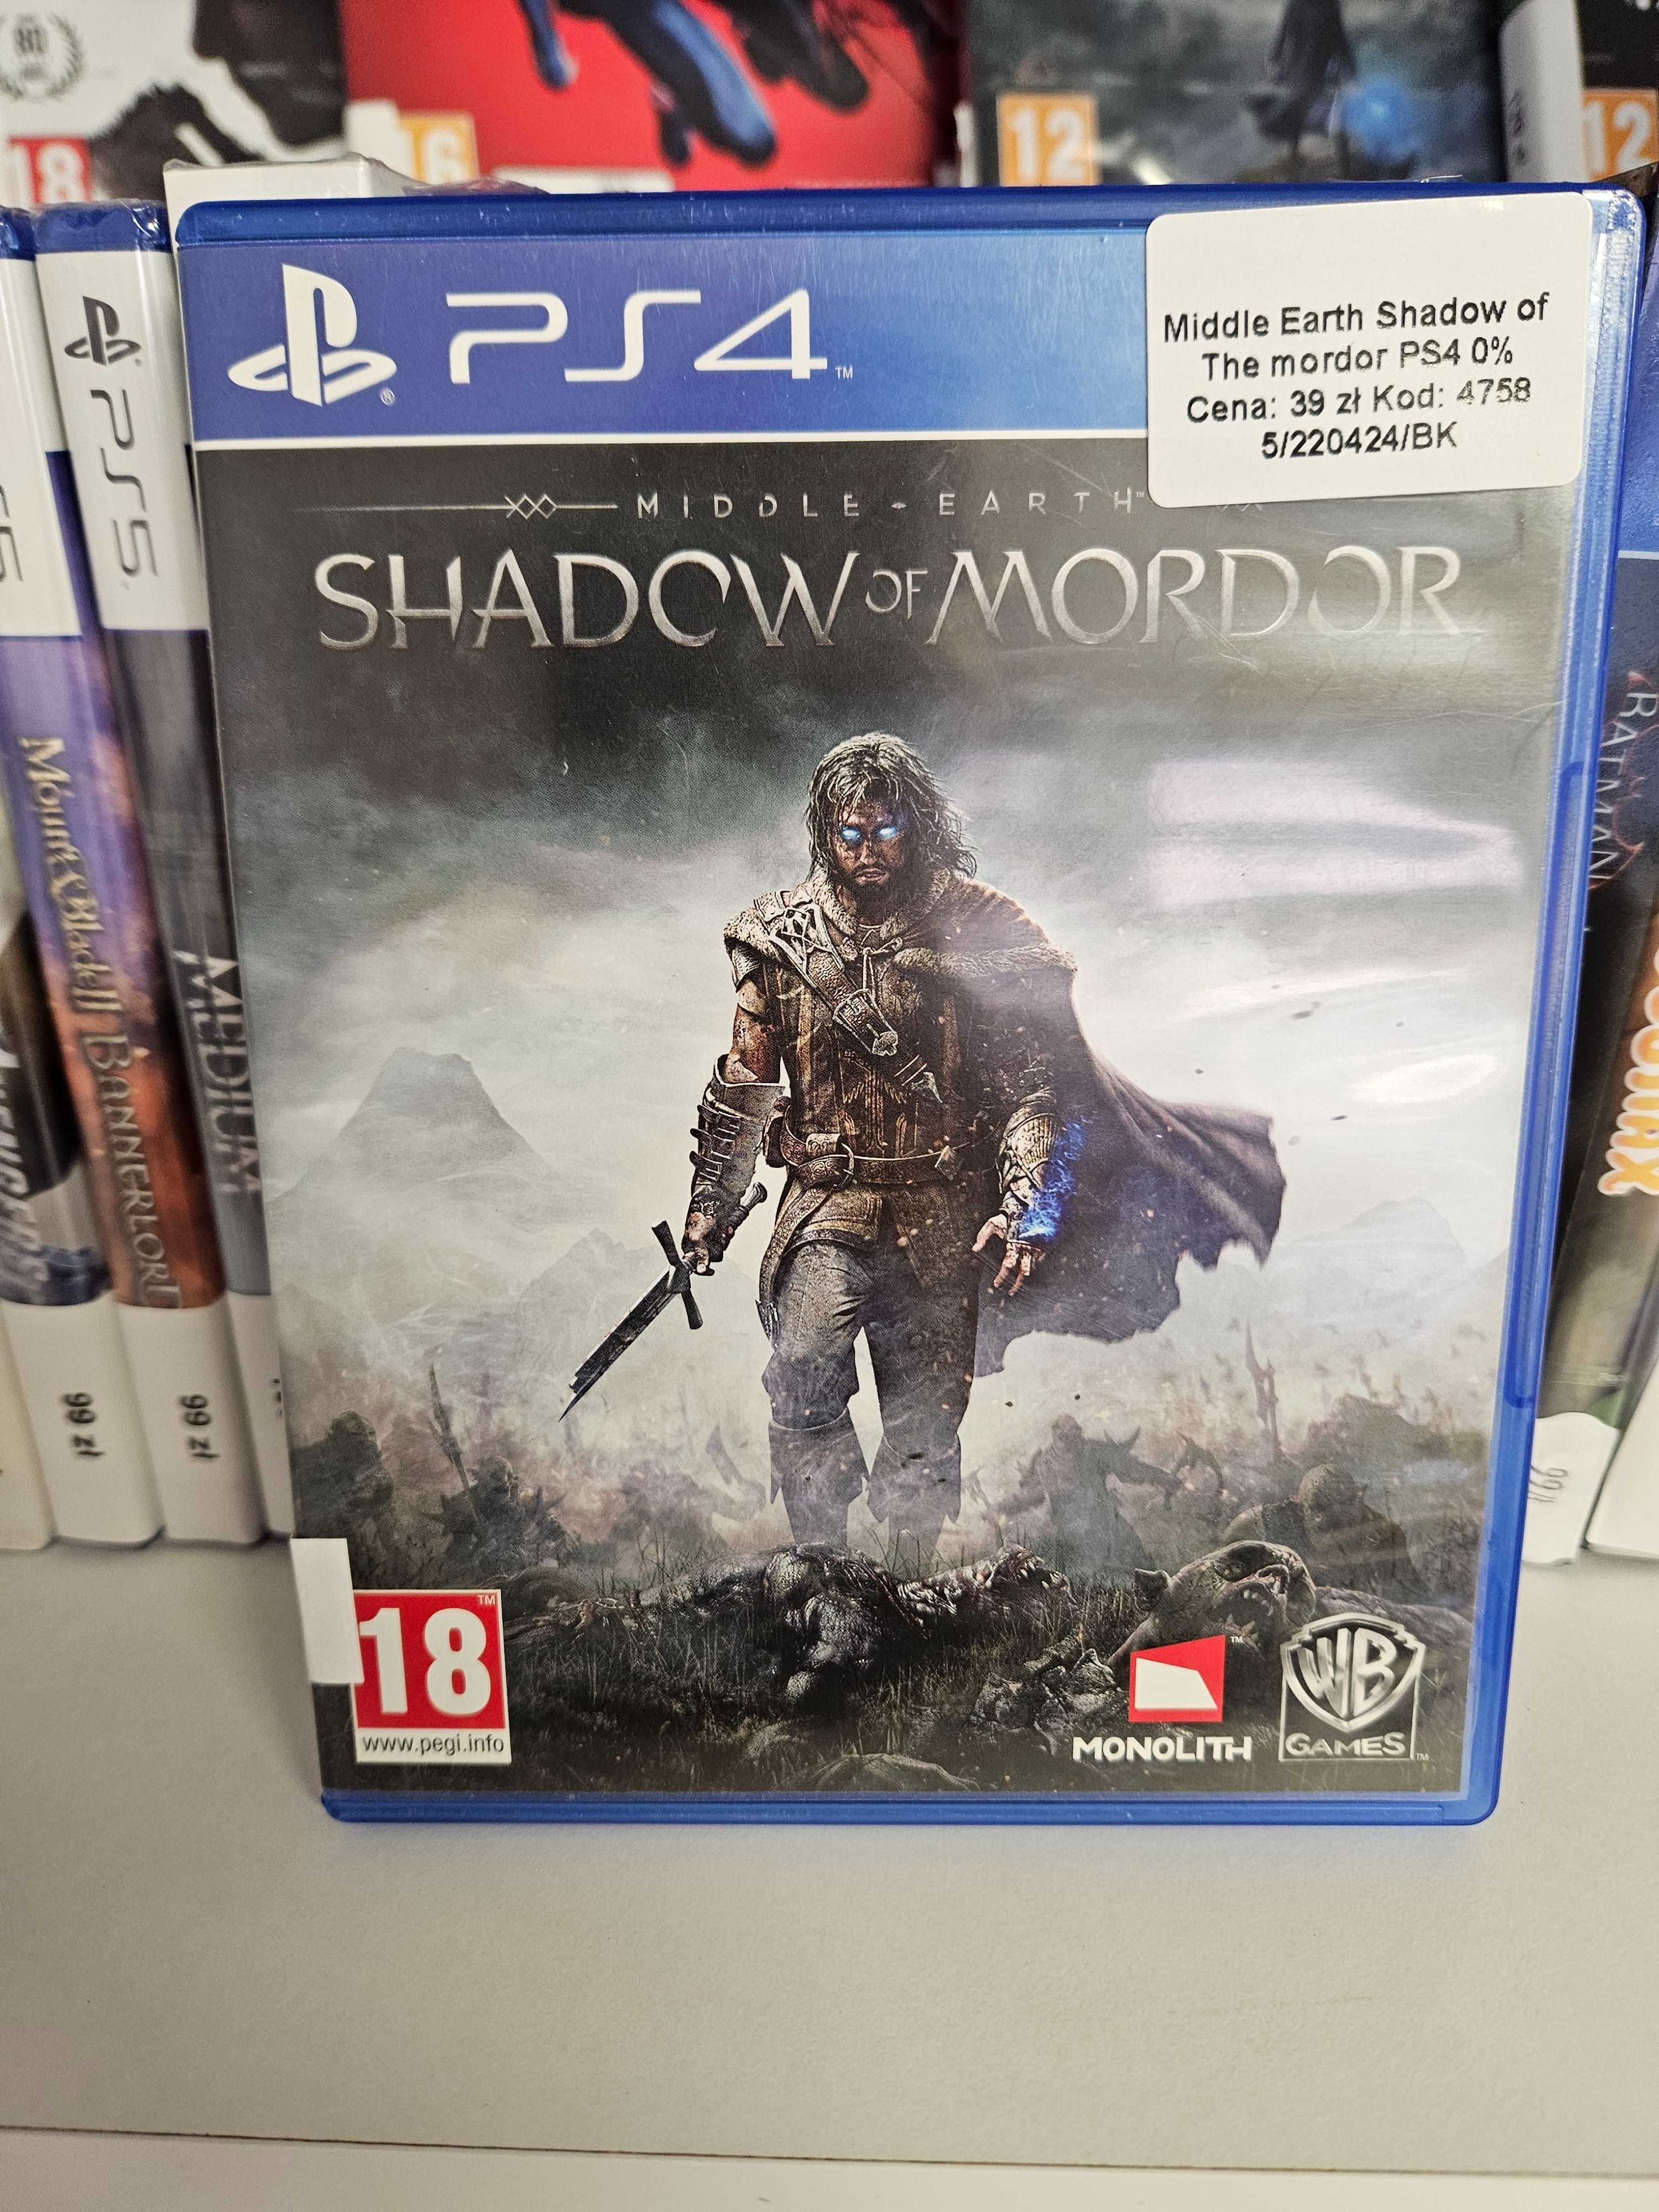 Middle Earth Shadow of the Mordor PS4 As Game & GSM 4758